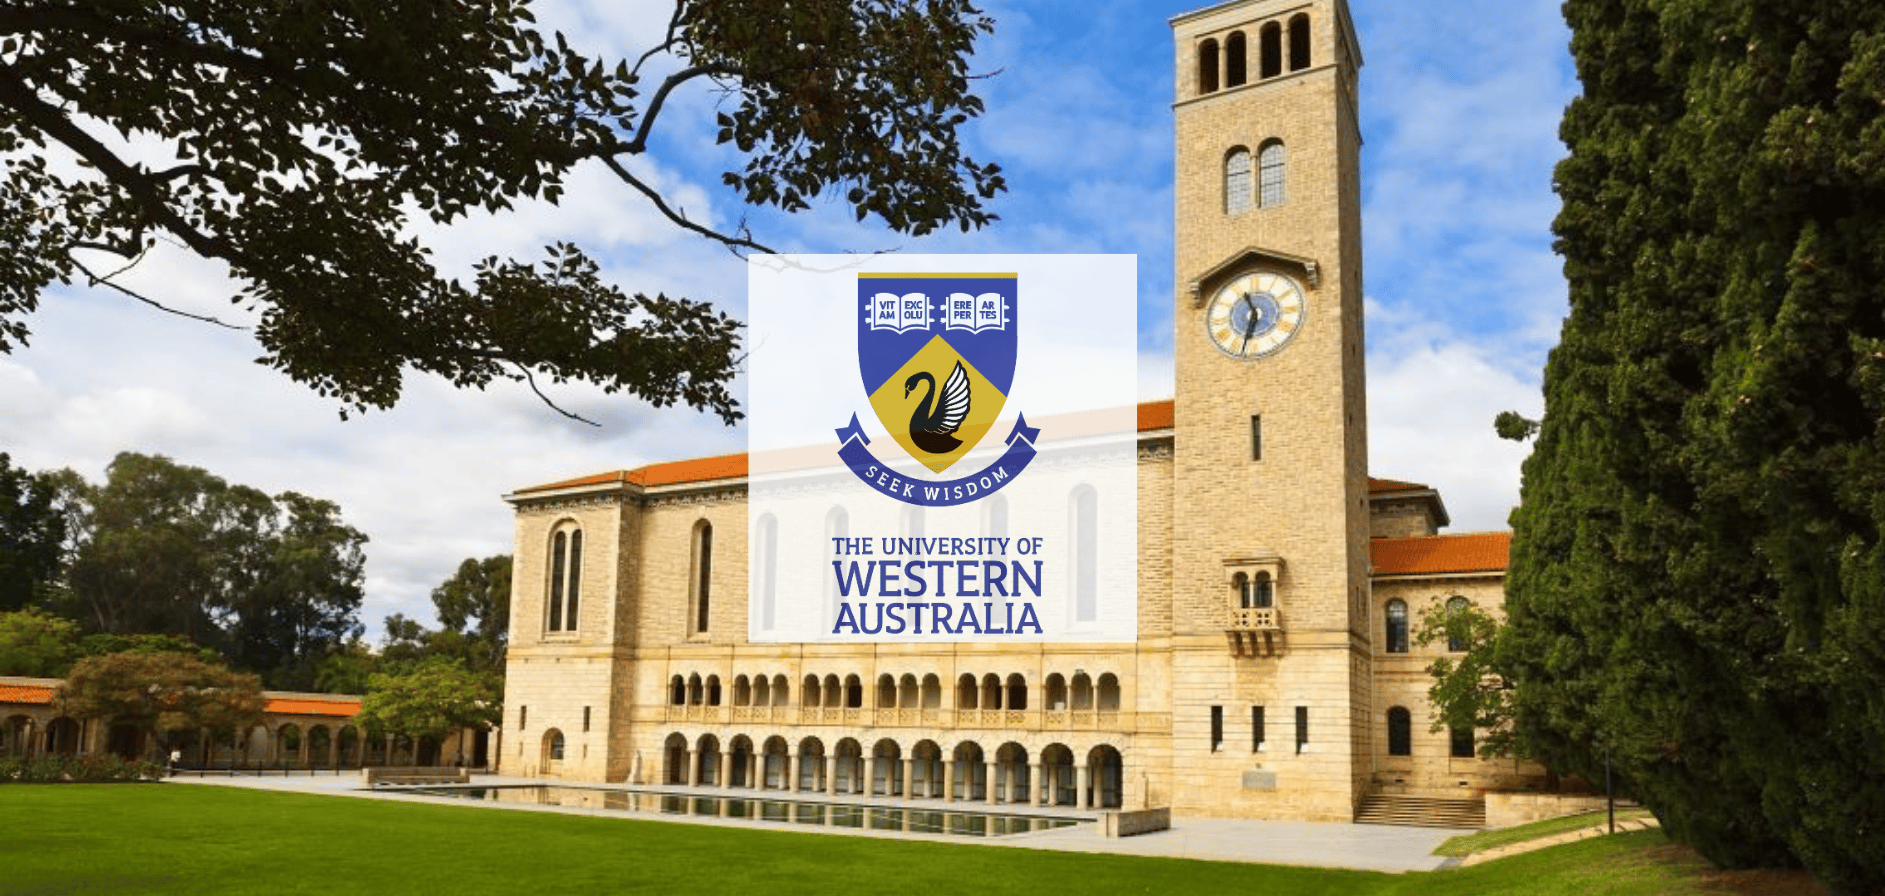 english language course scholarships for international ph.d. students in australia, 2018